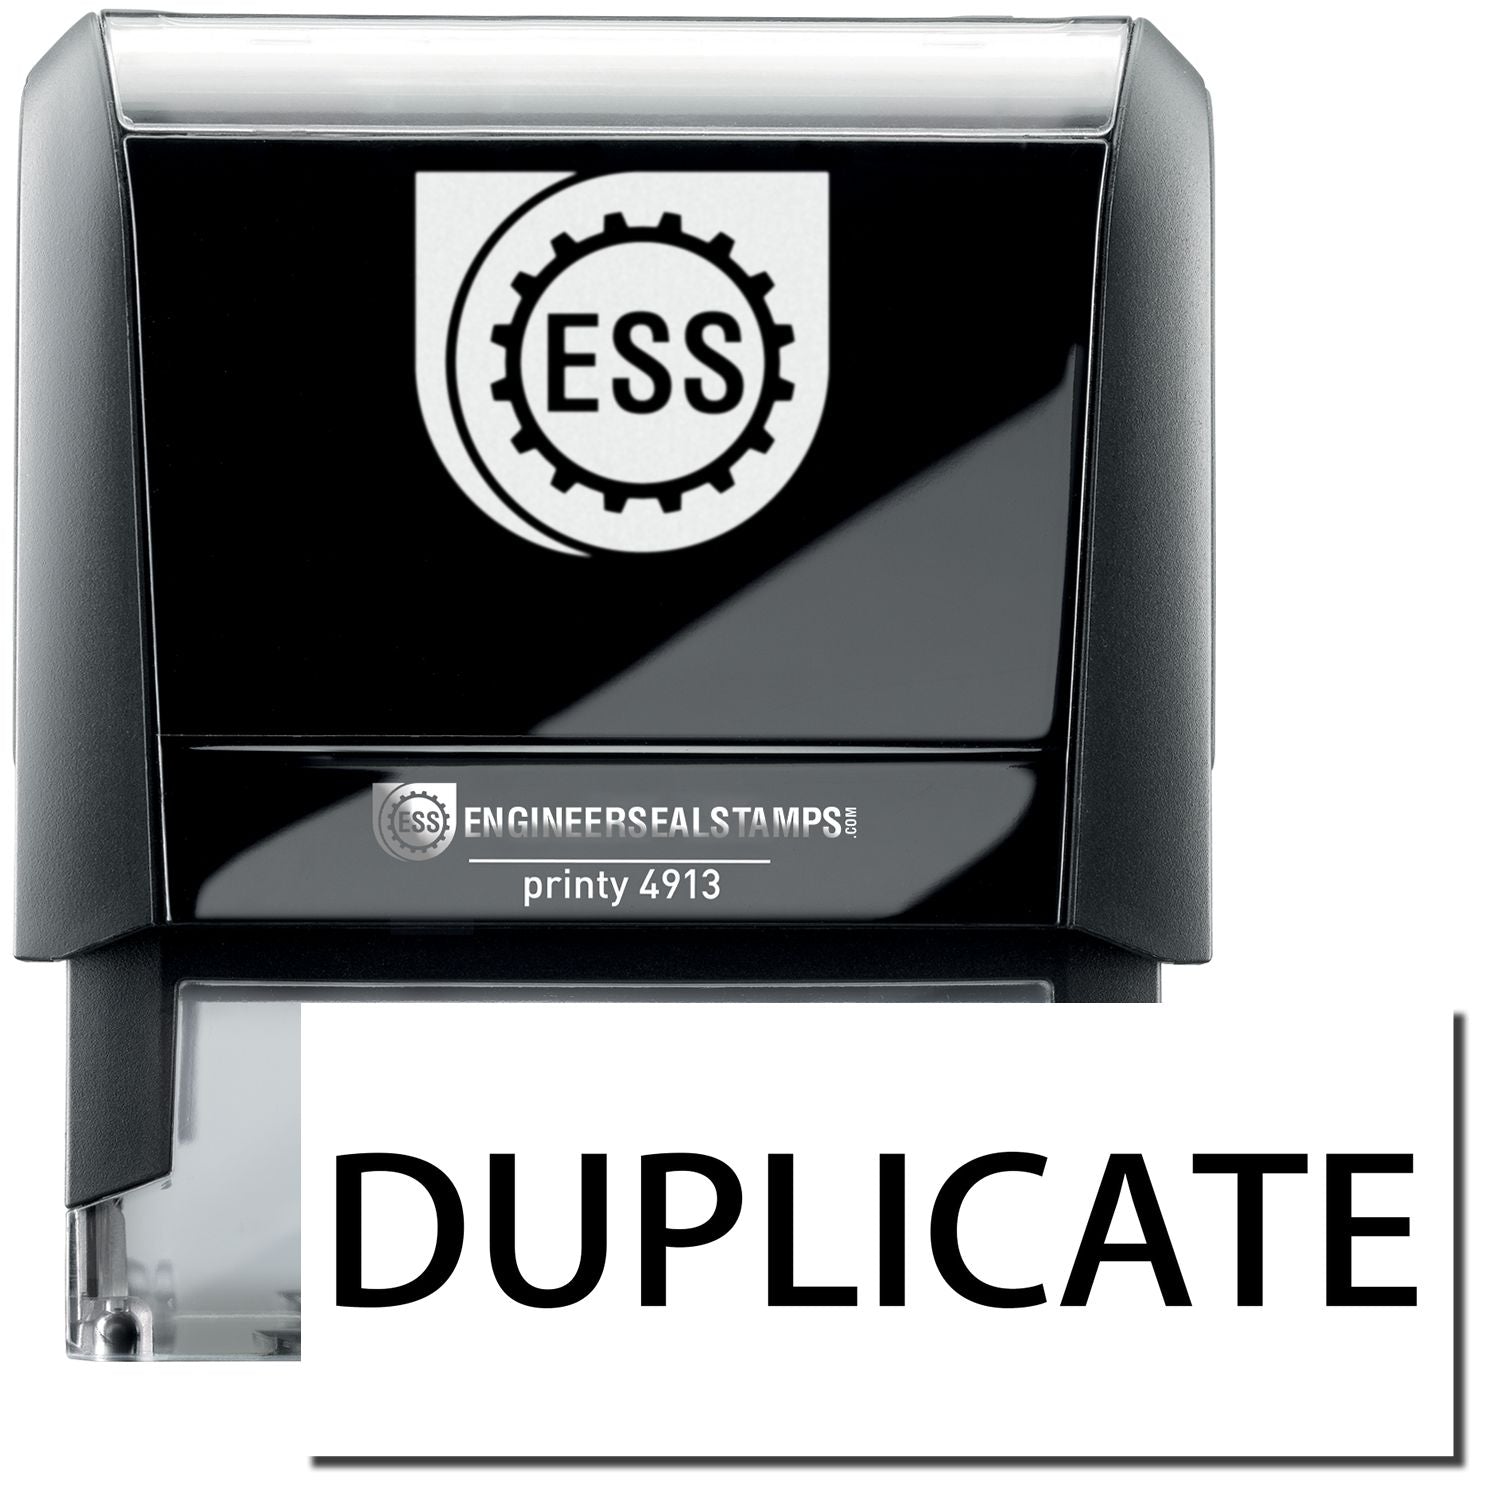 A self-inking stamp with a stamped image showing how the text "DUPLICATE" in a large bold font is displayed by it.